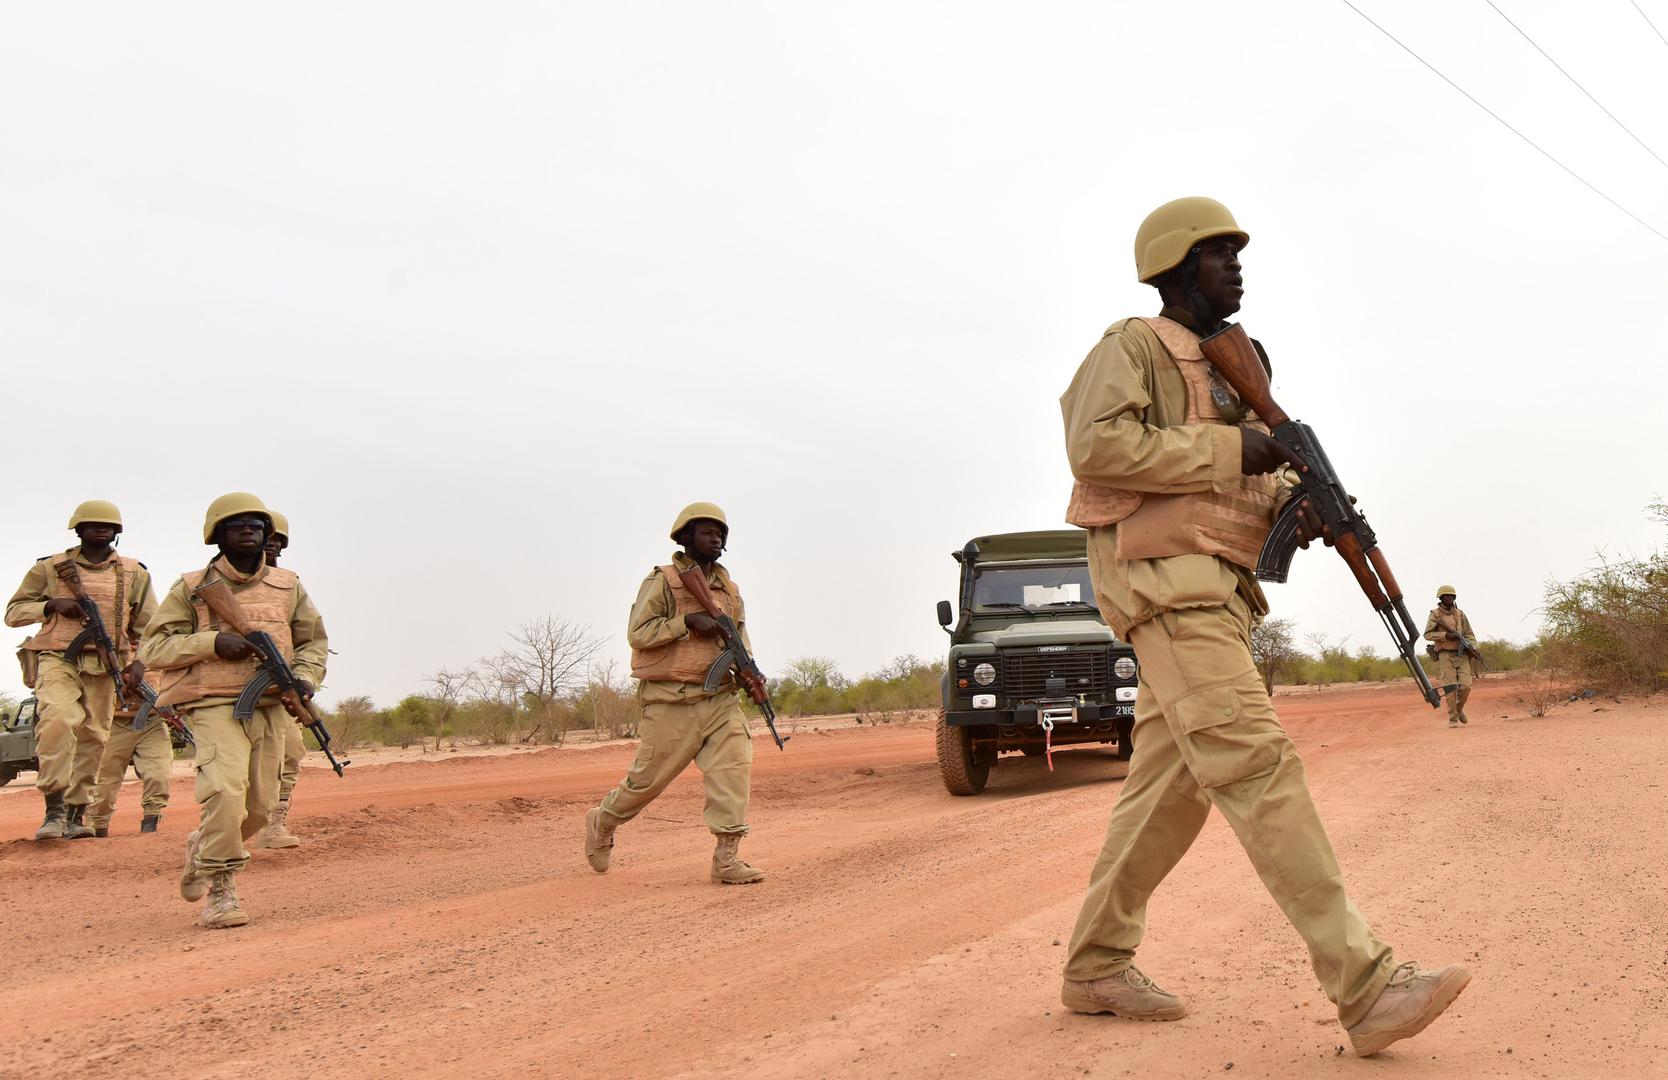 Soldiers from Burkina Faso take part in a training exercise in Burkina Faso on April 13, 2018.